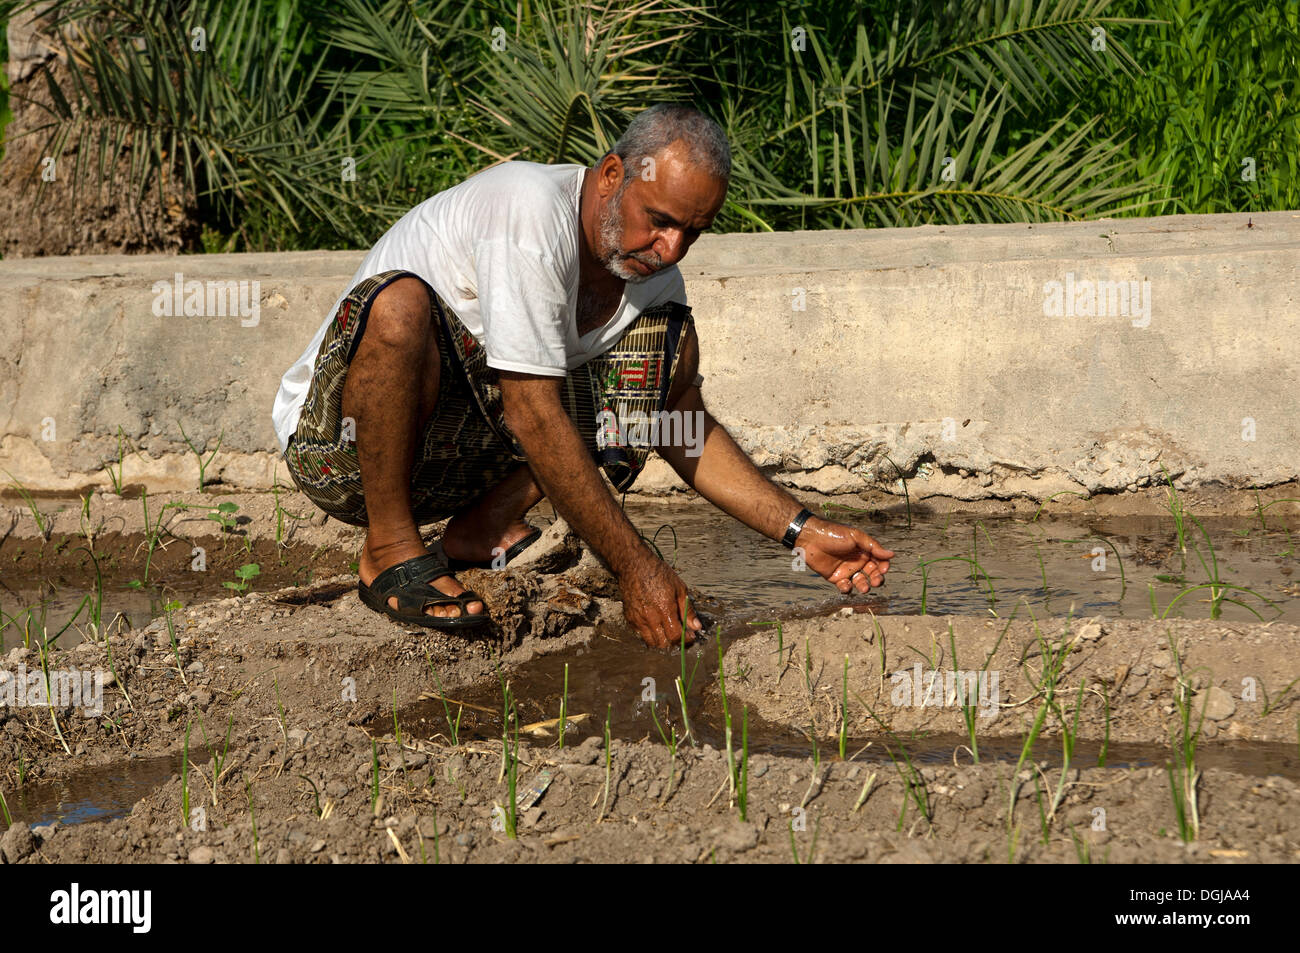 Omani man controlling the irrigation canals in the garden of an oasis, Al Hamra, Ad Dakhiliyah, Oman Stock Photo